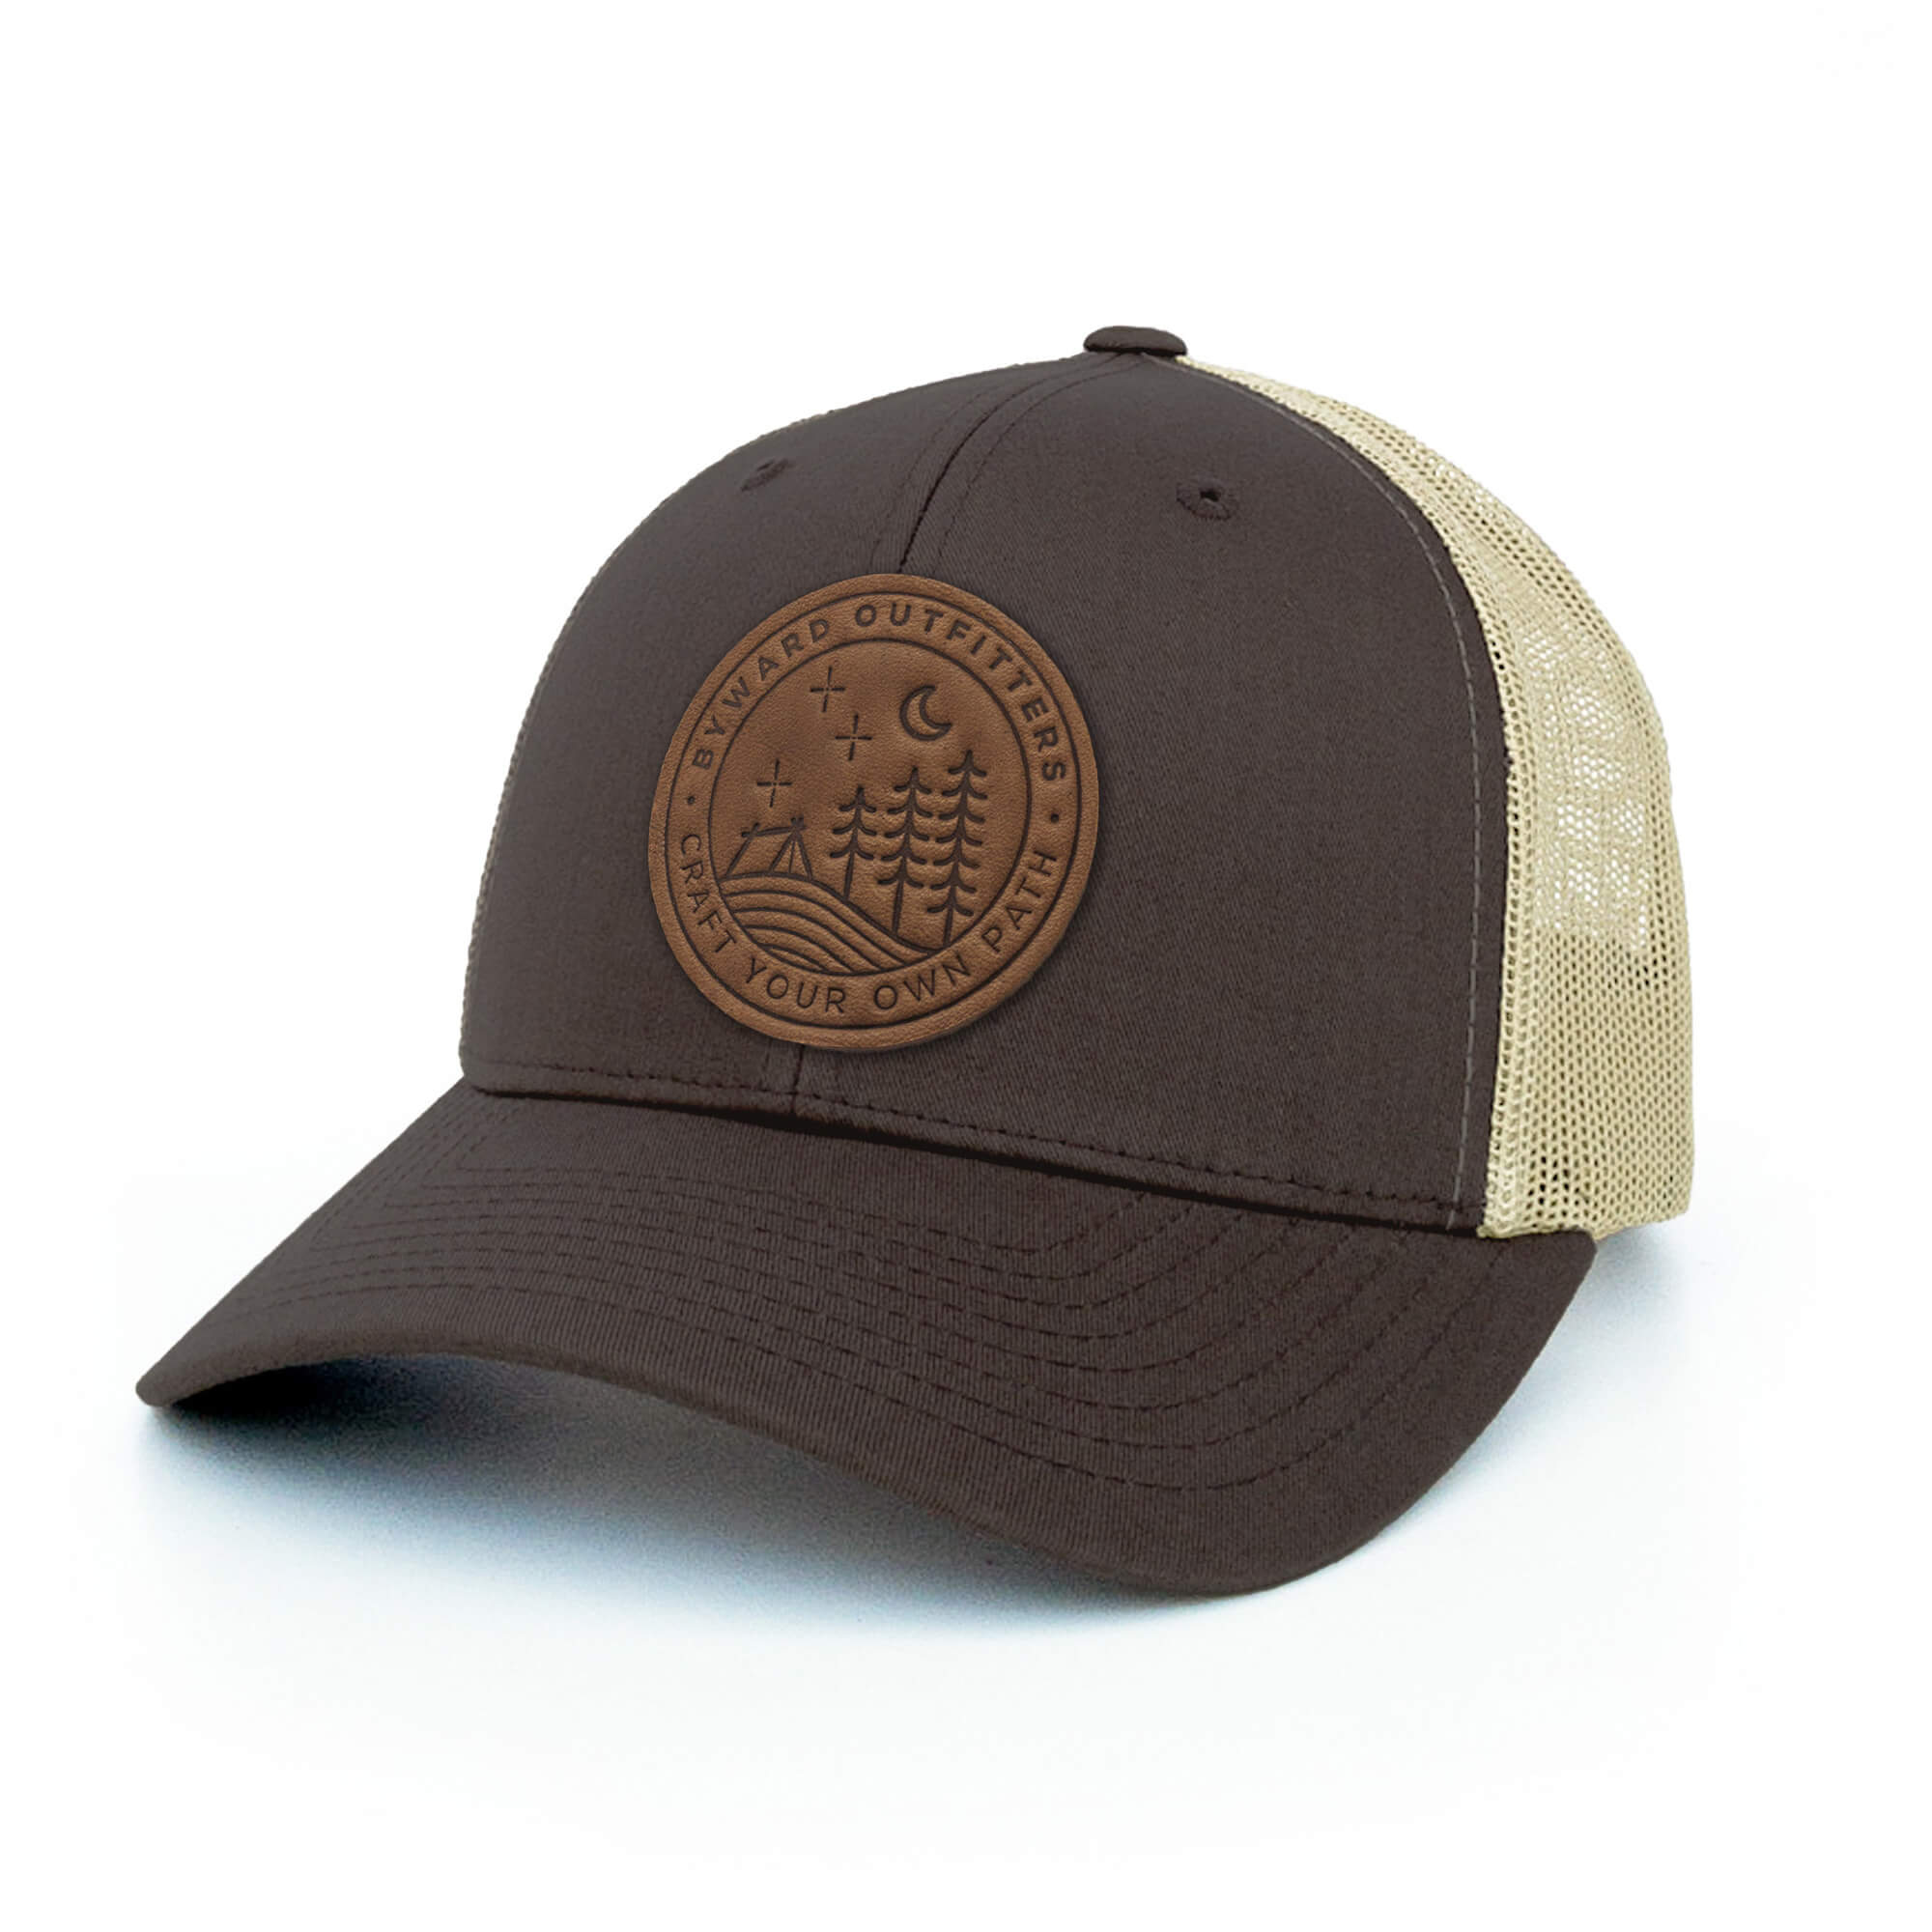 Brown and khaki trucker hat with full-grain leather patch of Stellar Night | BLACK-005-001, CHARC-005-001, NAVY-005-001, HGREY-005-001, MOSS-005-001, BROWN-005-001